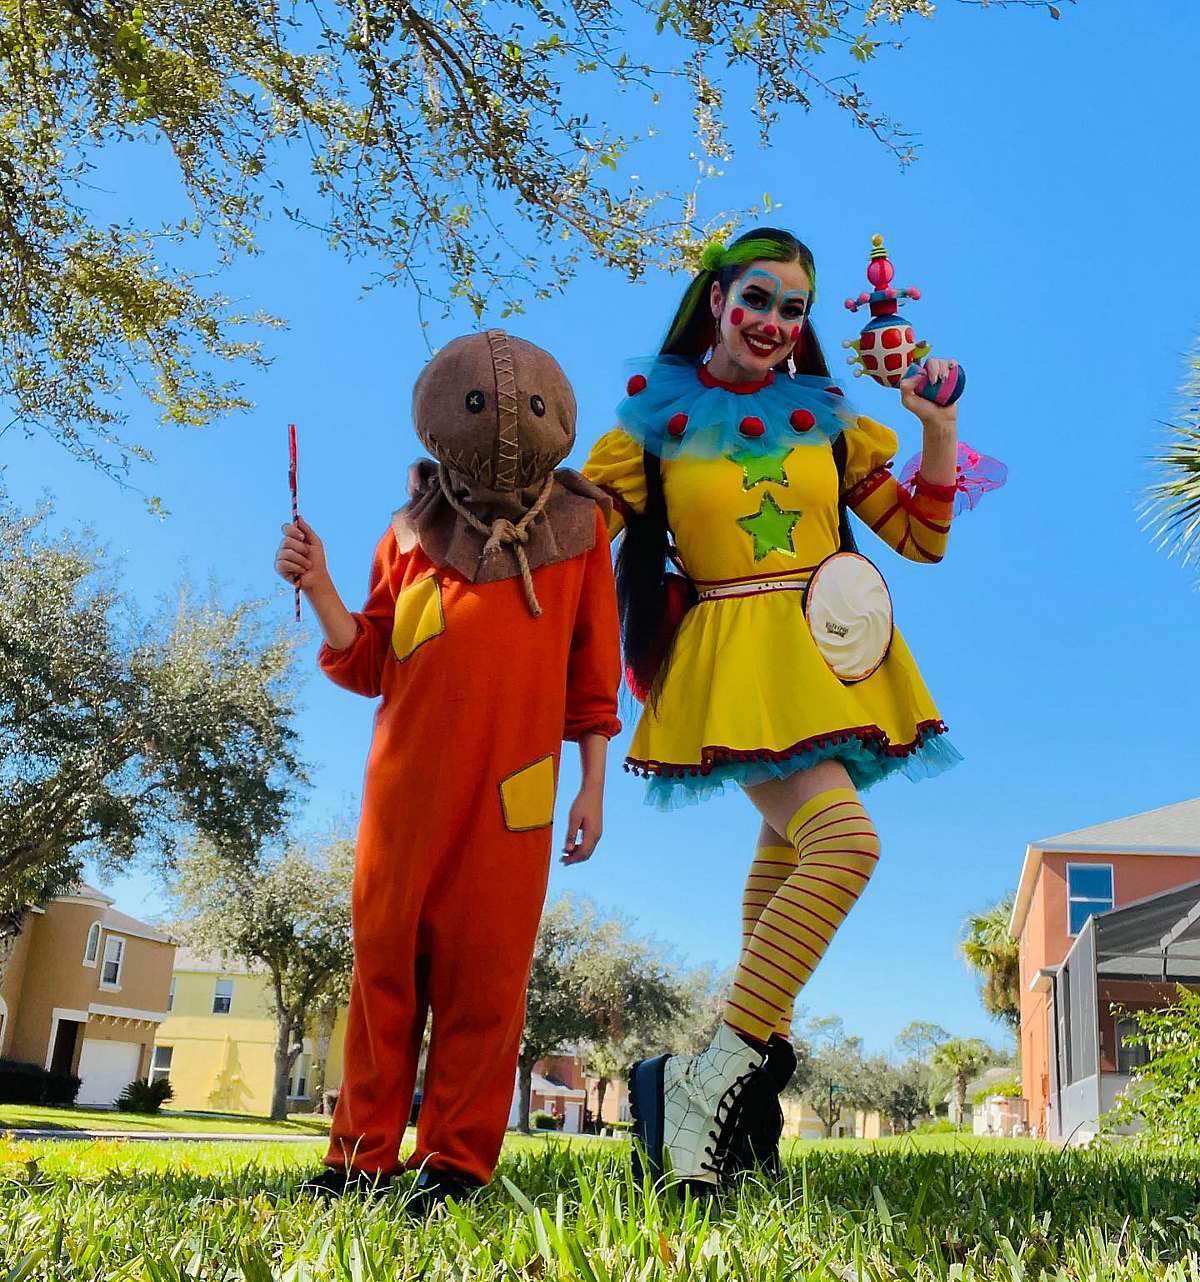 Kids dressing up as Sam from Trick 'r Treat and Killer Klowns from Outer Space